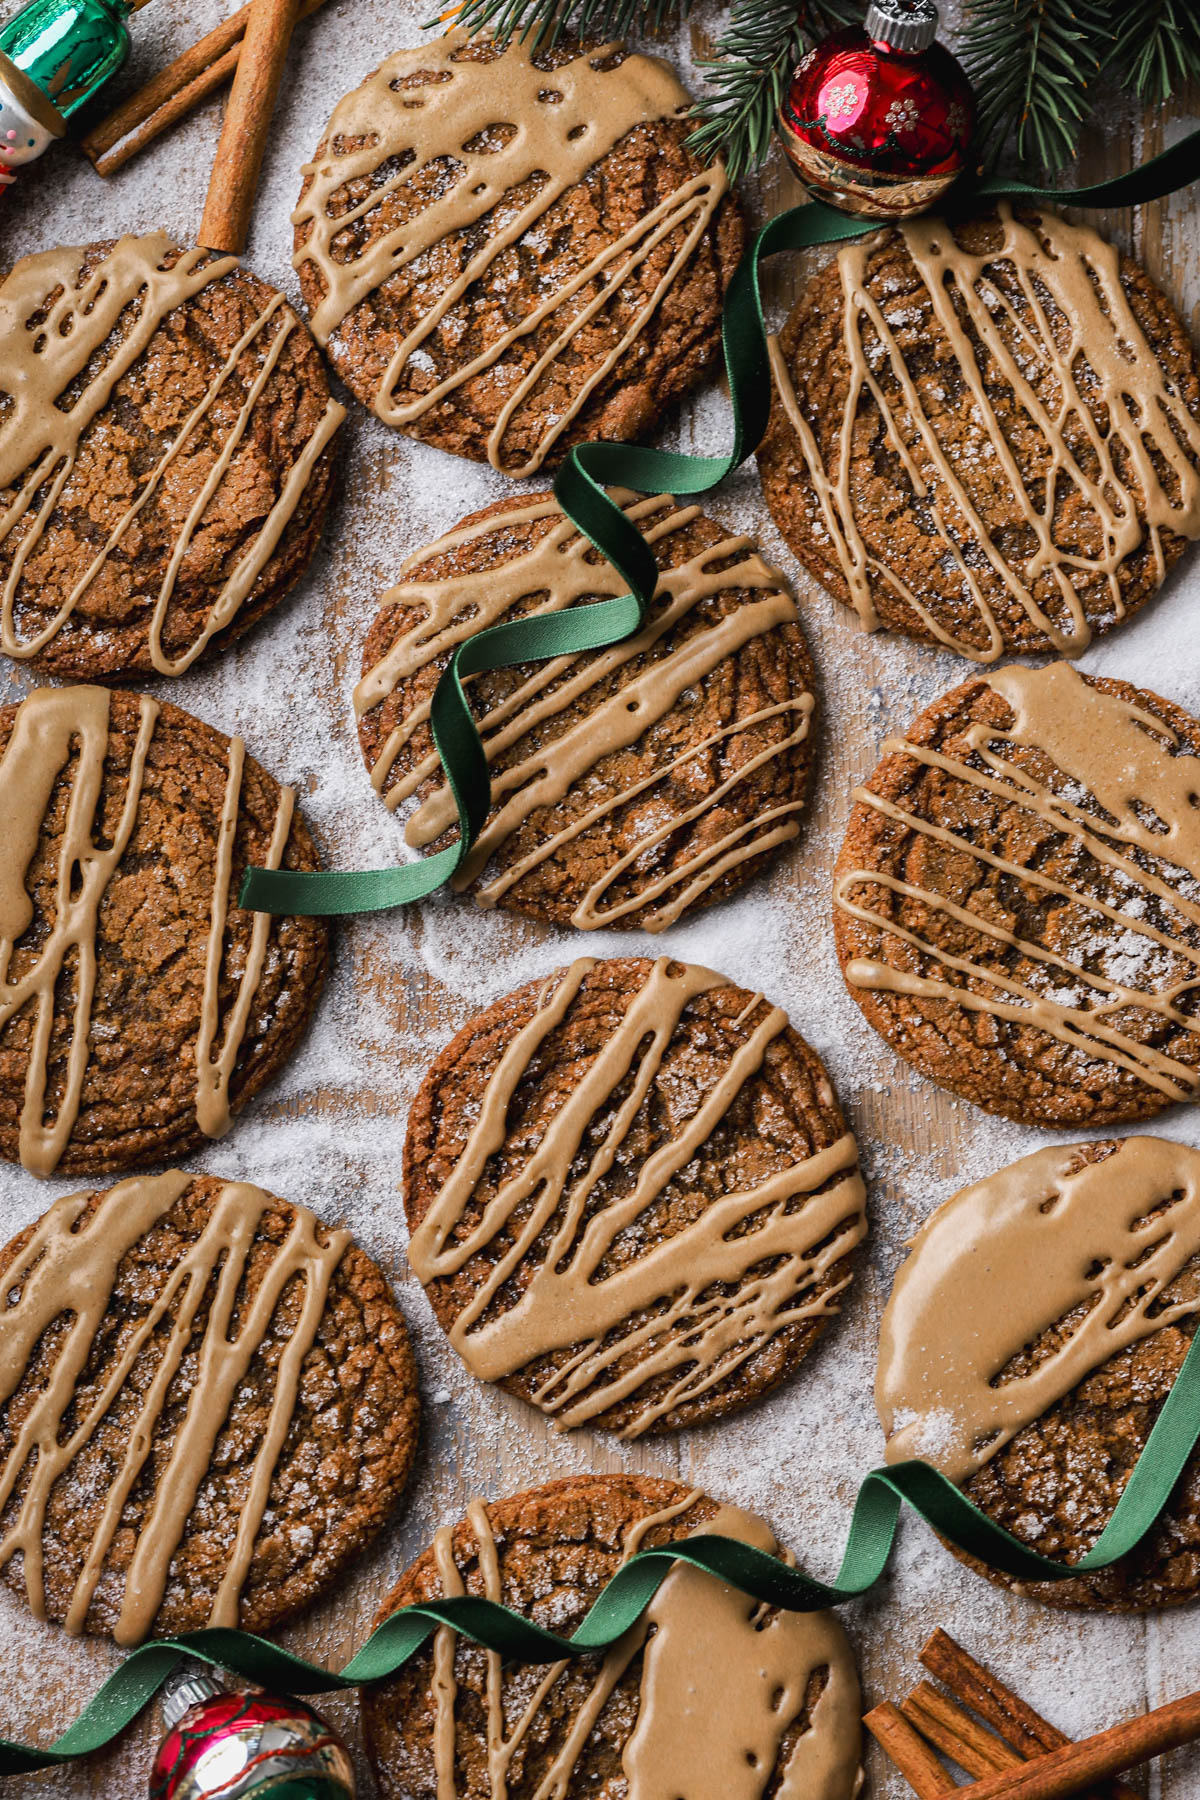 Bakery-style gingerbread cookies flavored with ground ginger, molasses and espresso powder.  